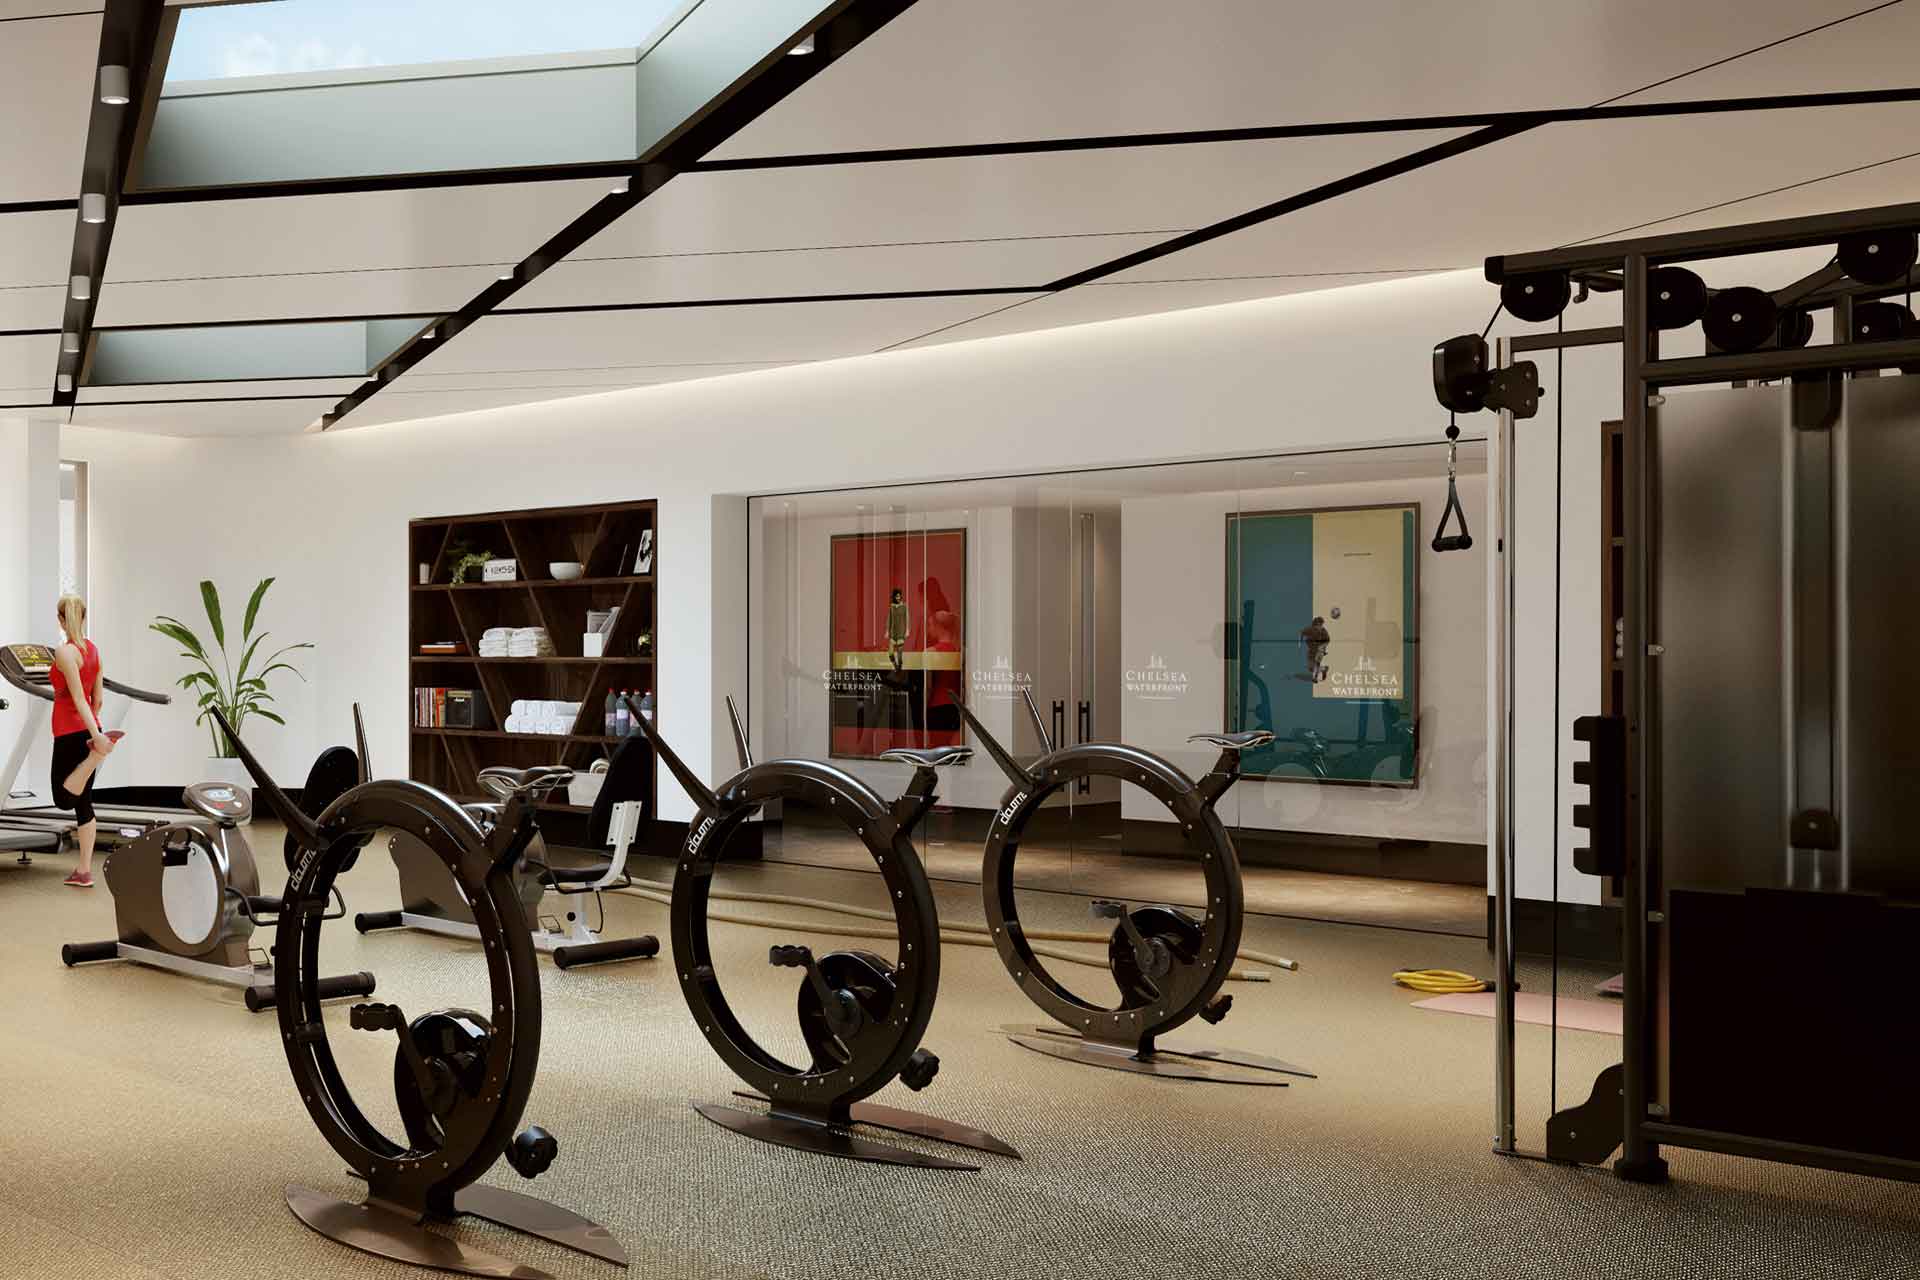 Gym with diamond-shaped skylight windows and wooden flooring.